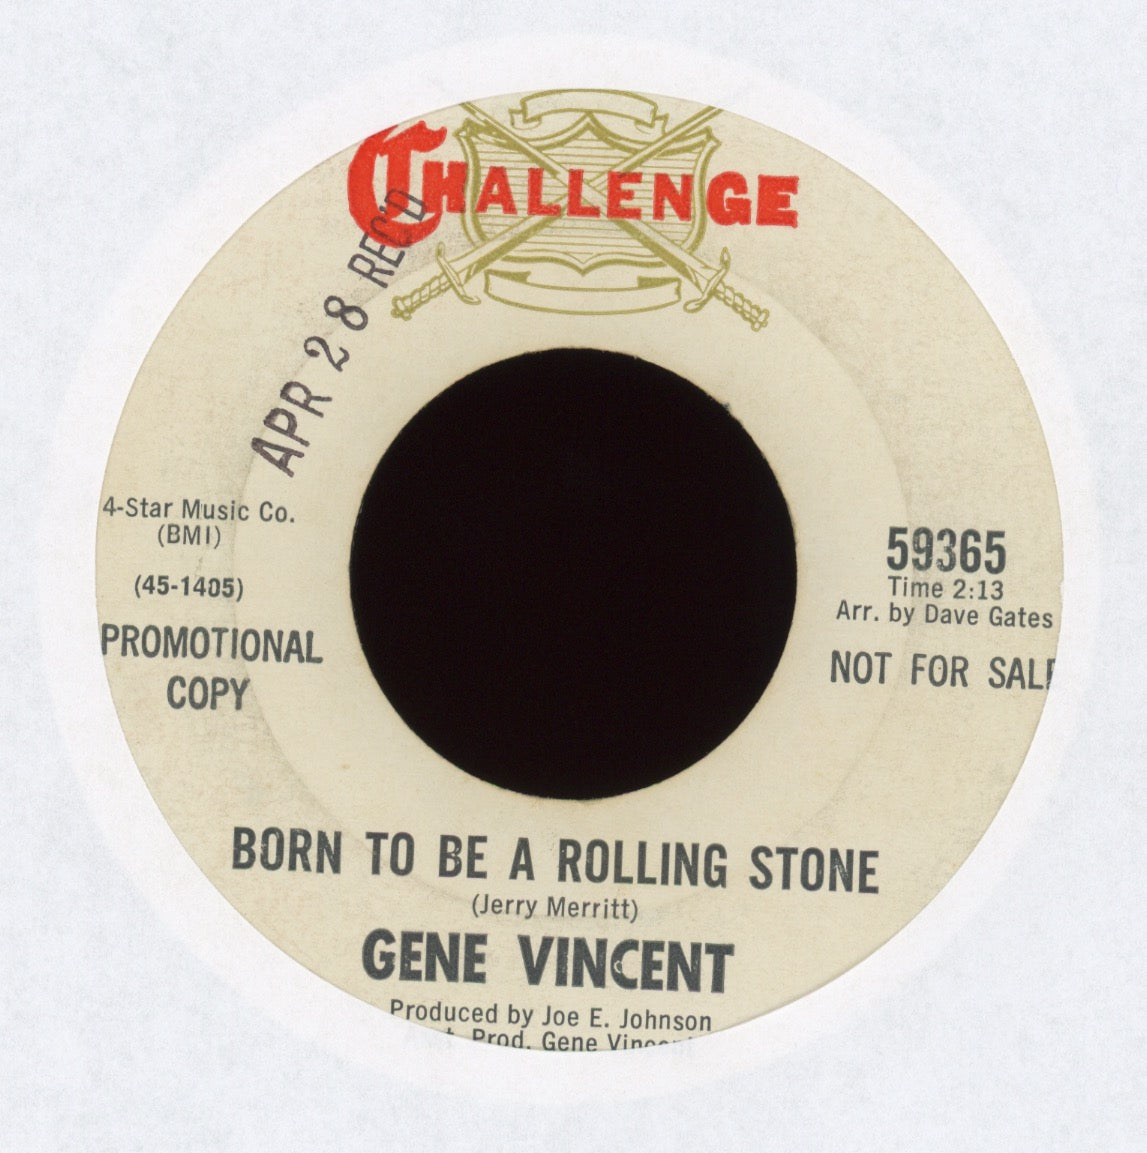 Gene Vincent - Born To Be A Rolling Stone on Challenge Promo